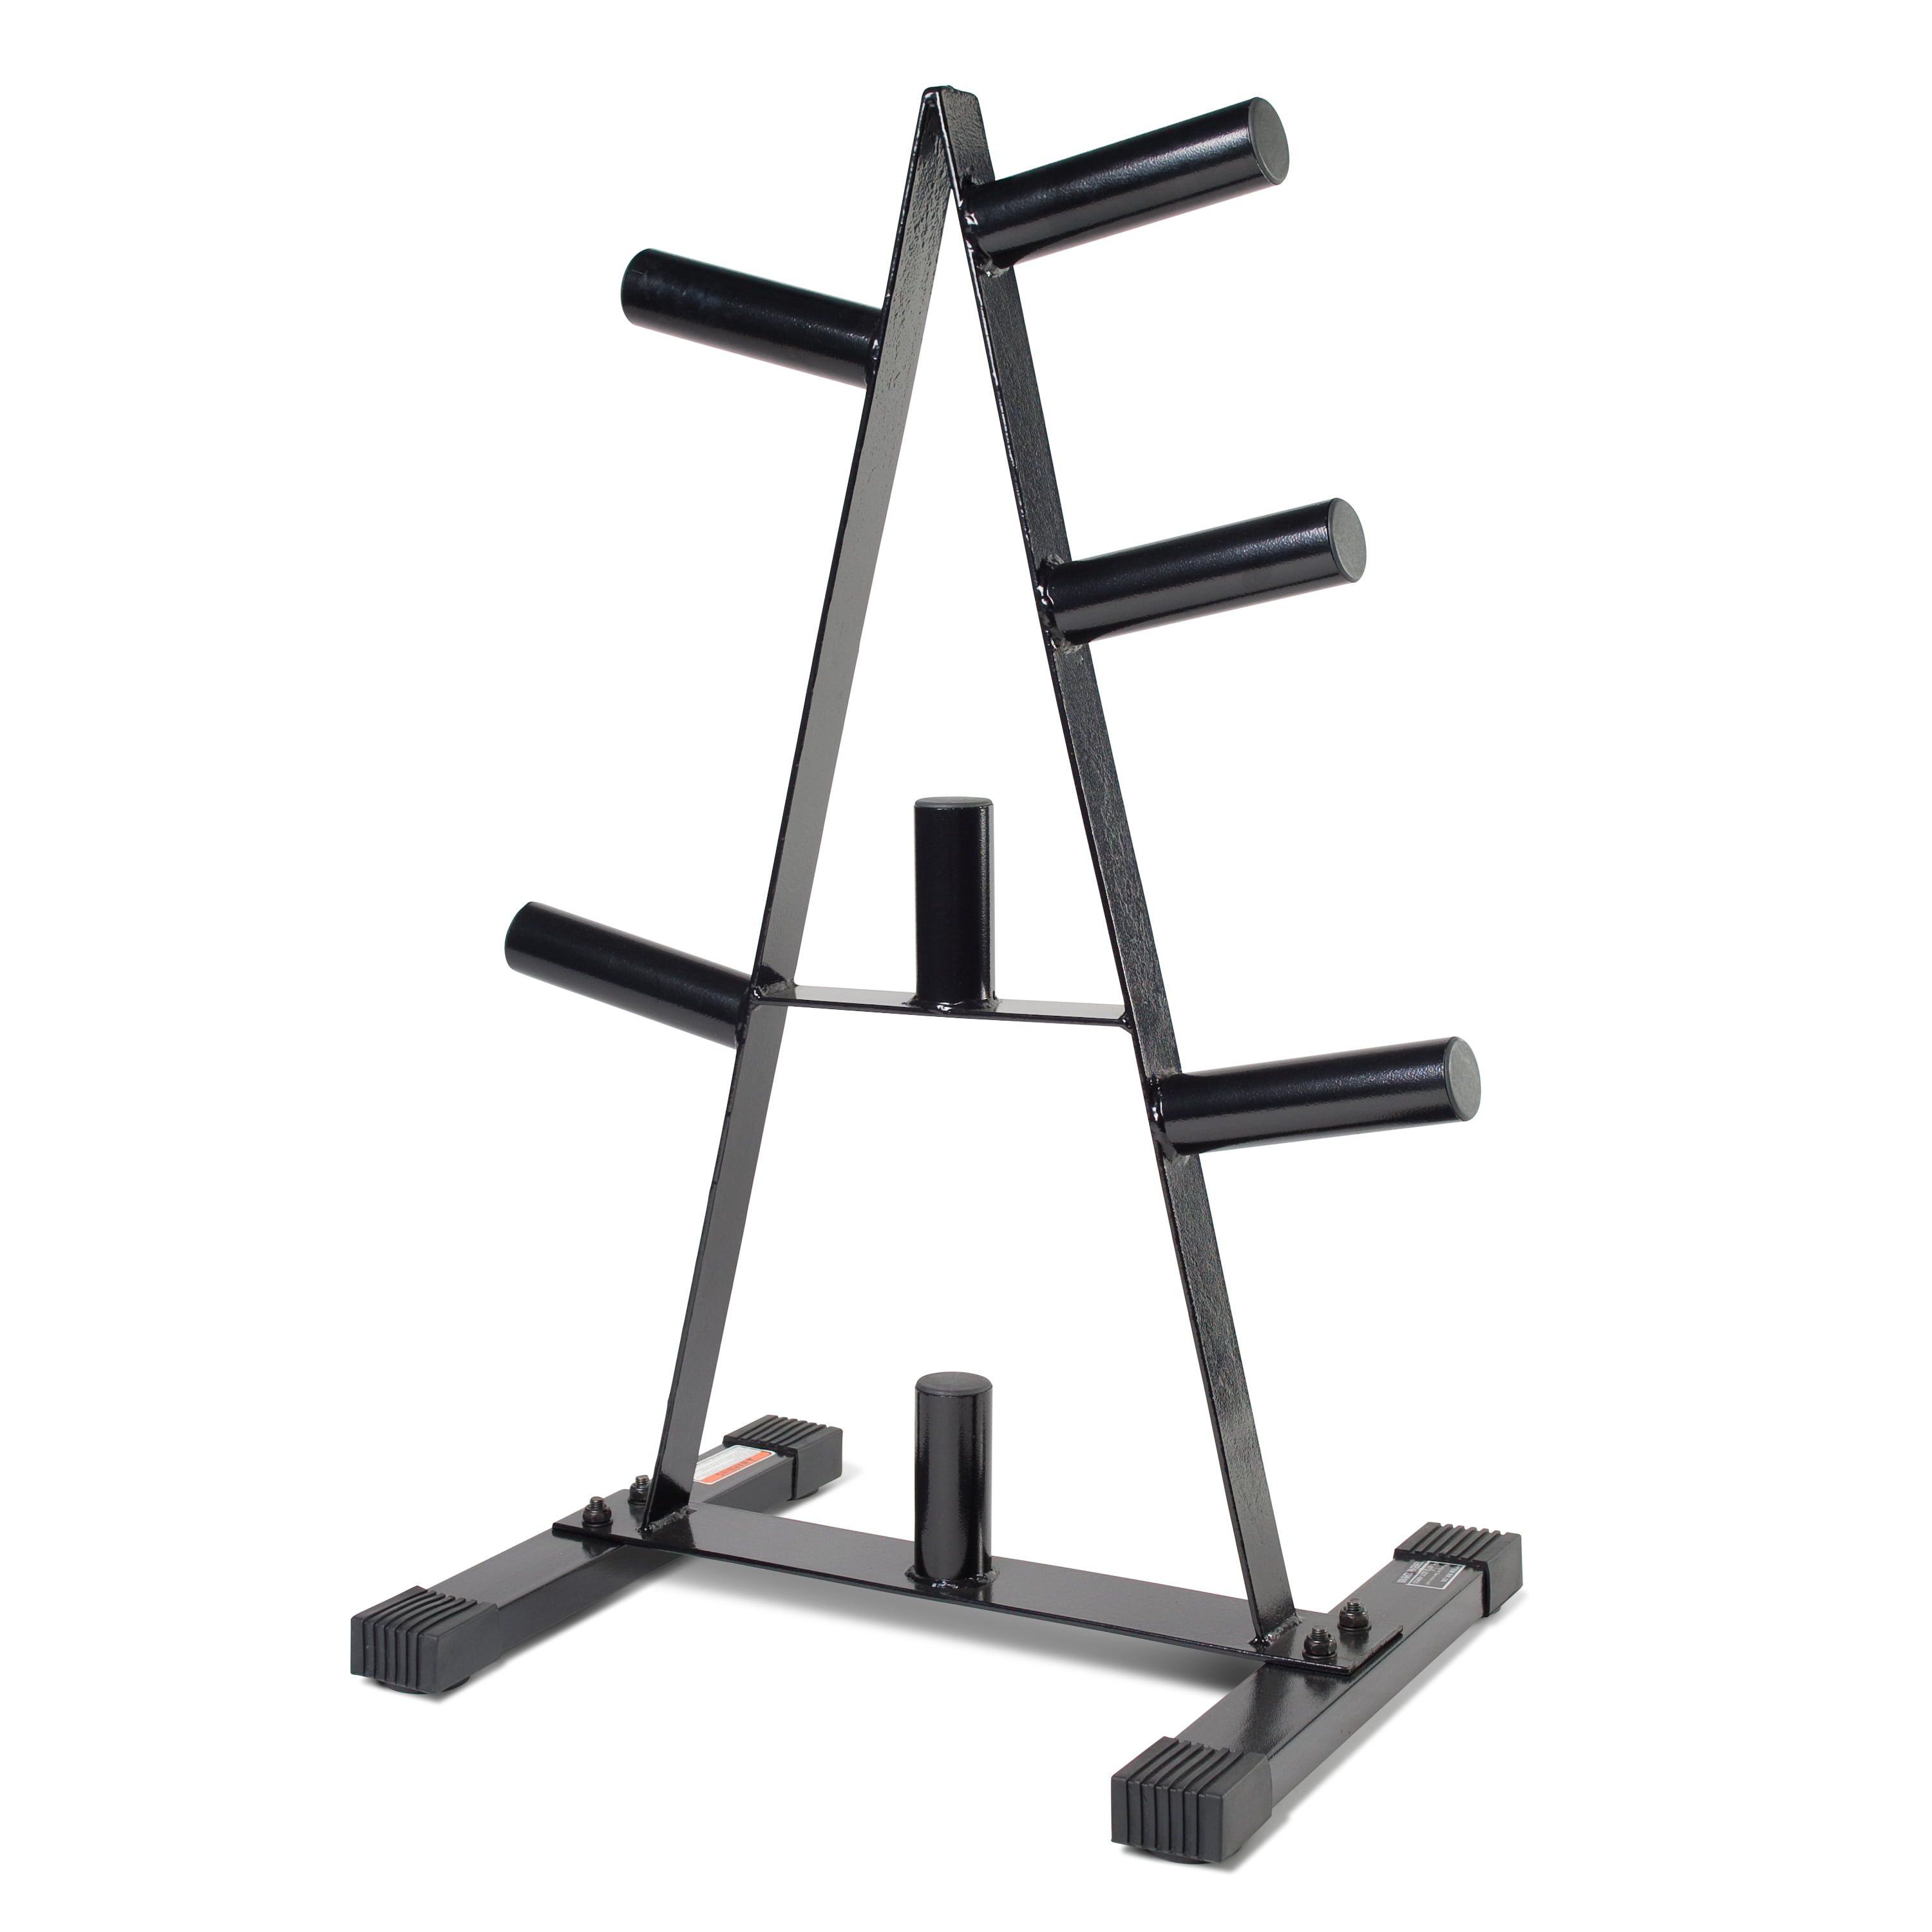 Cap Barbell Olympic Plate Weight Tree Storage Rack Home Gym Equipment